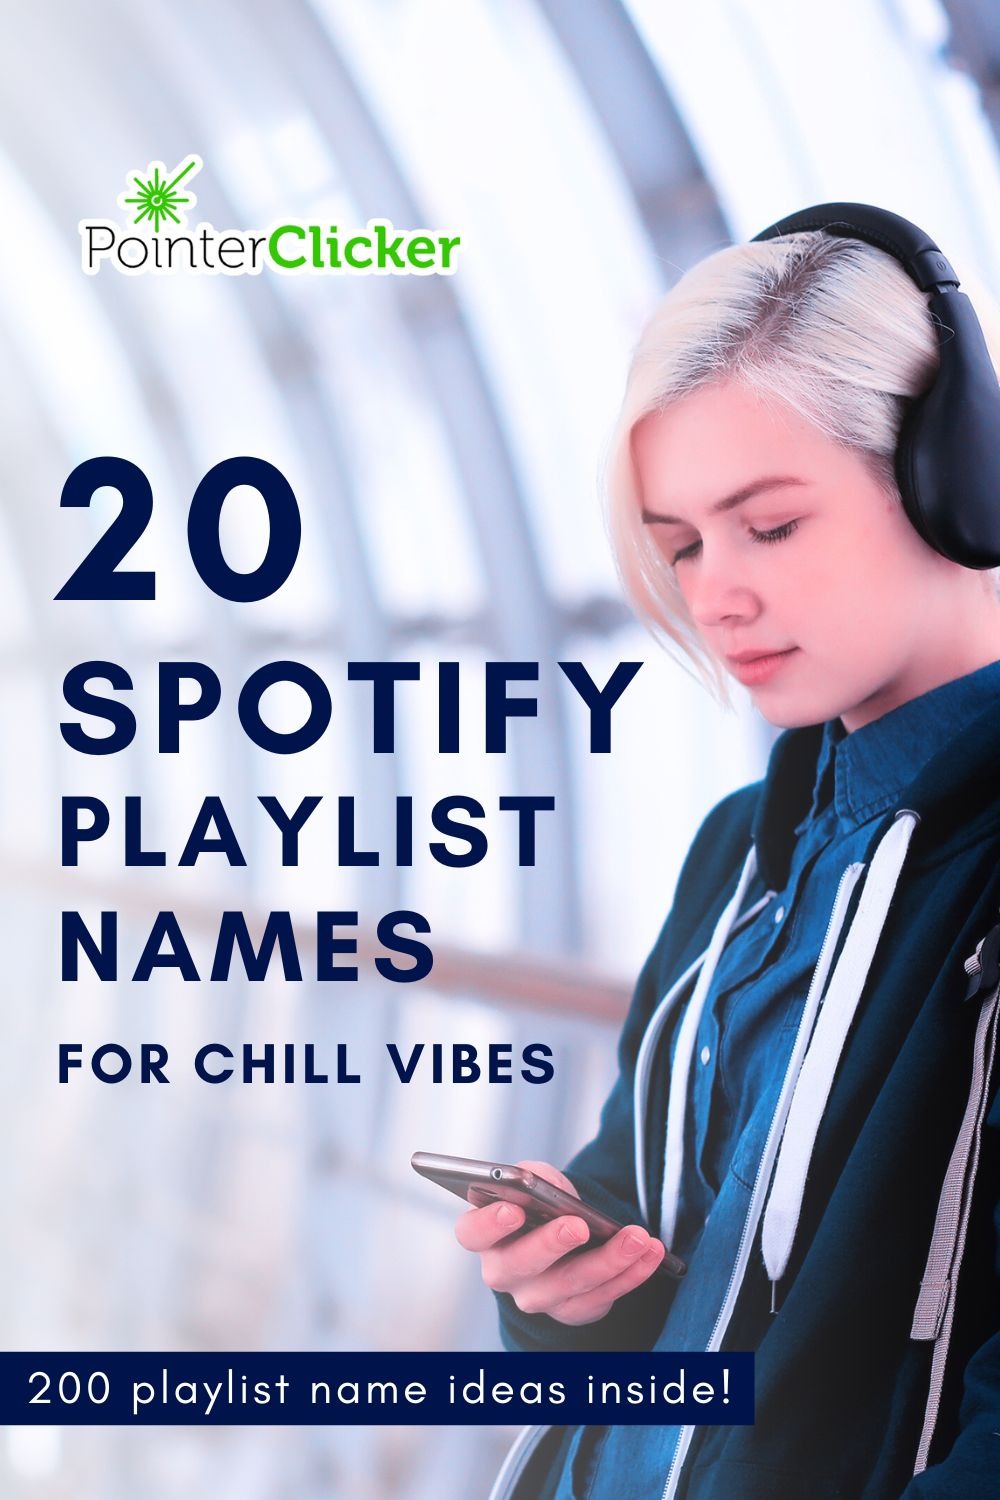 20 spotify playlist names for chill vibes - 200 spotify name ideas inside 